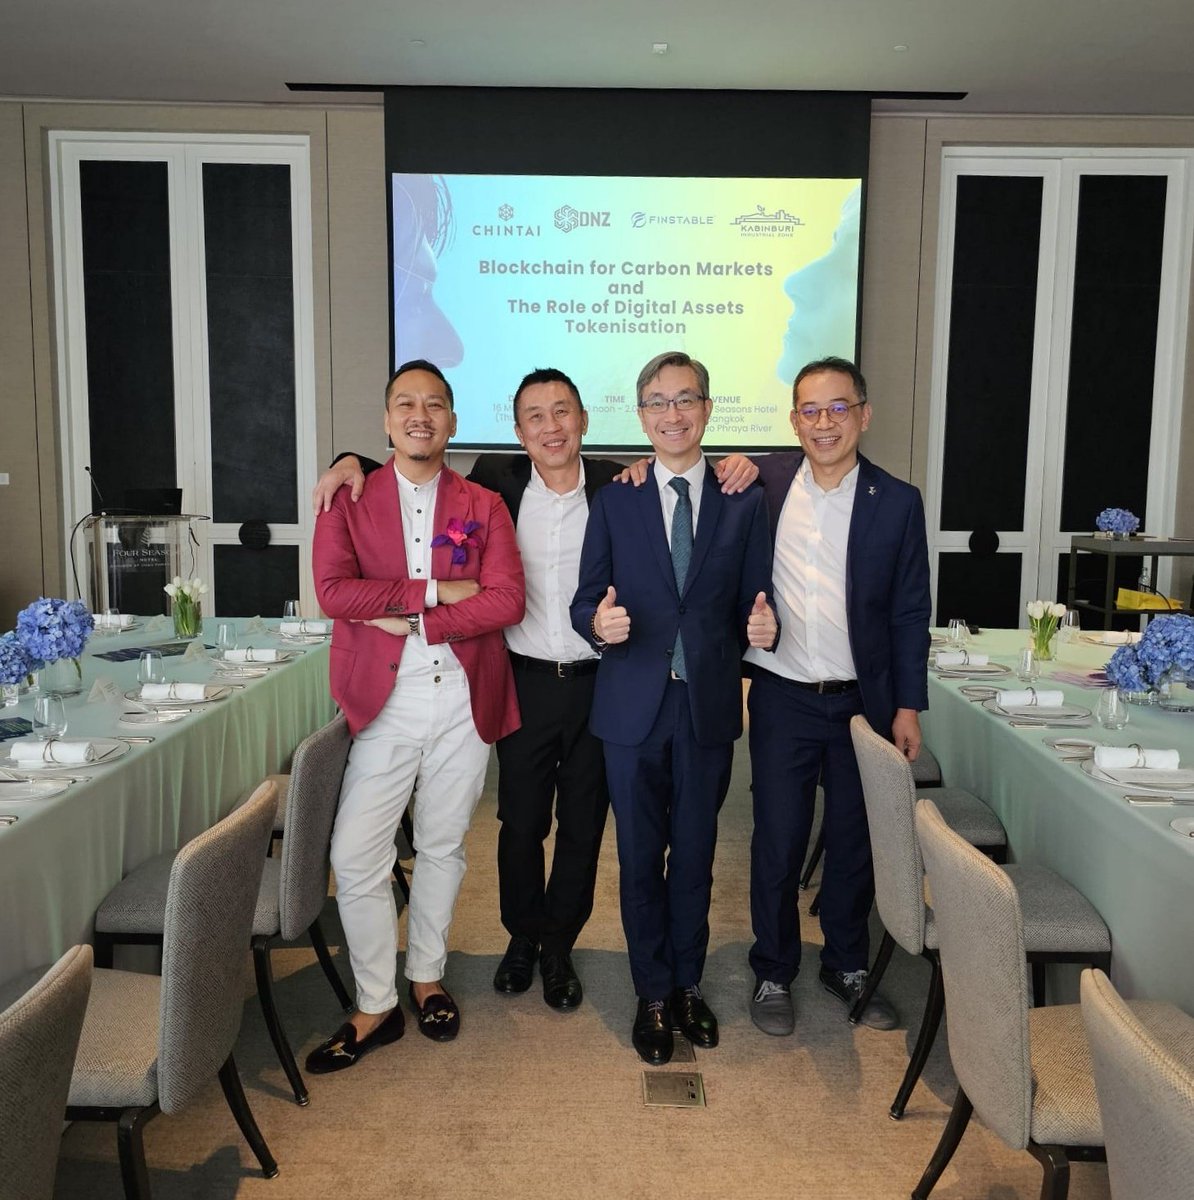 We are getting ready with our clients and partners ahead of the Blockchain for Carbon Markets event in Bangkok. #chintai #chintainetwork #carboncredits #tokenisation #digitalassets